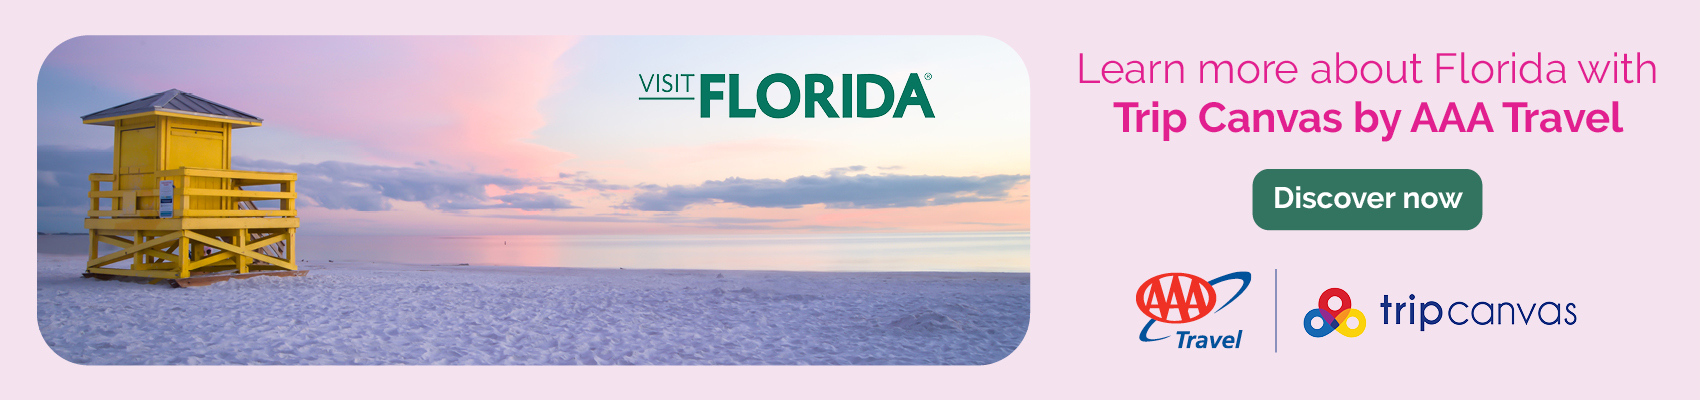 Learn more about Florida with Trip Canvas